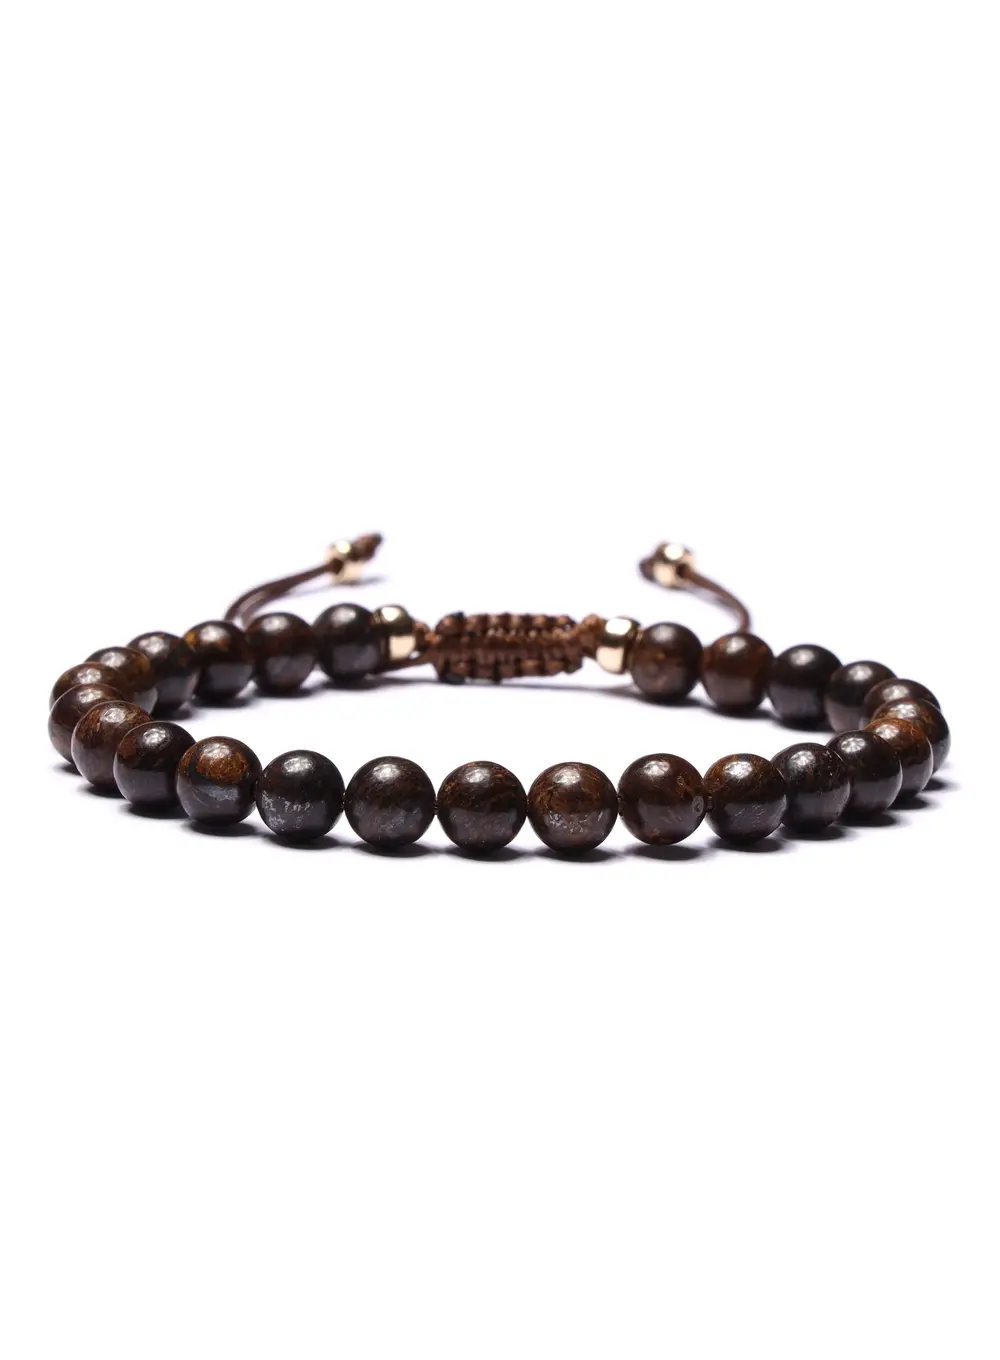 We Are All Smith Bronzite & Gold-Filled Bead Bracelet